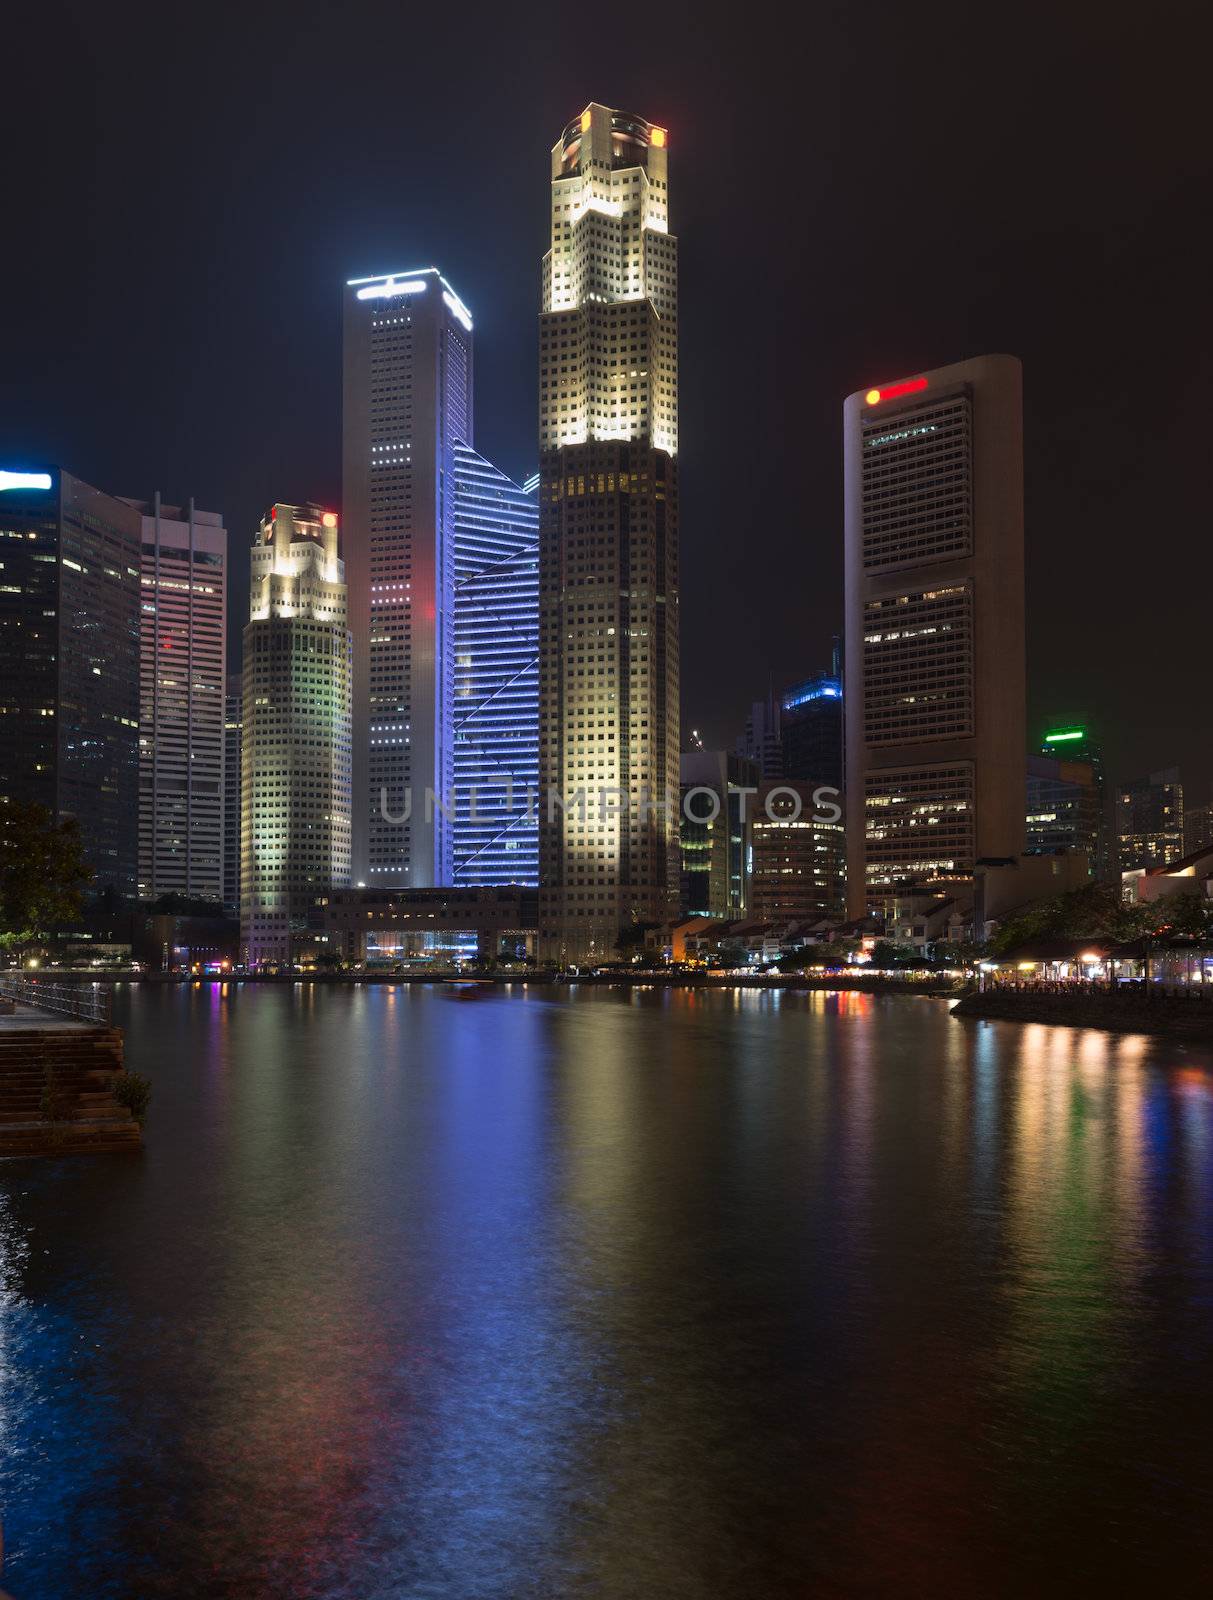 Singapore quay with tall illuminated skyscrapers in the central business district at night